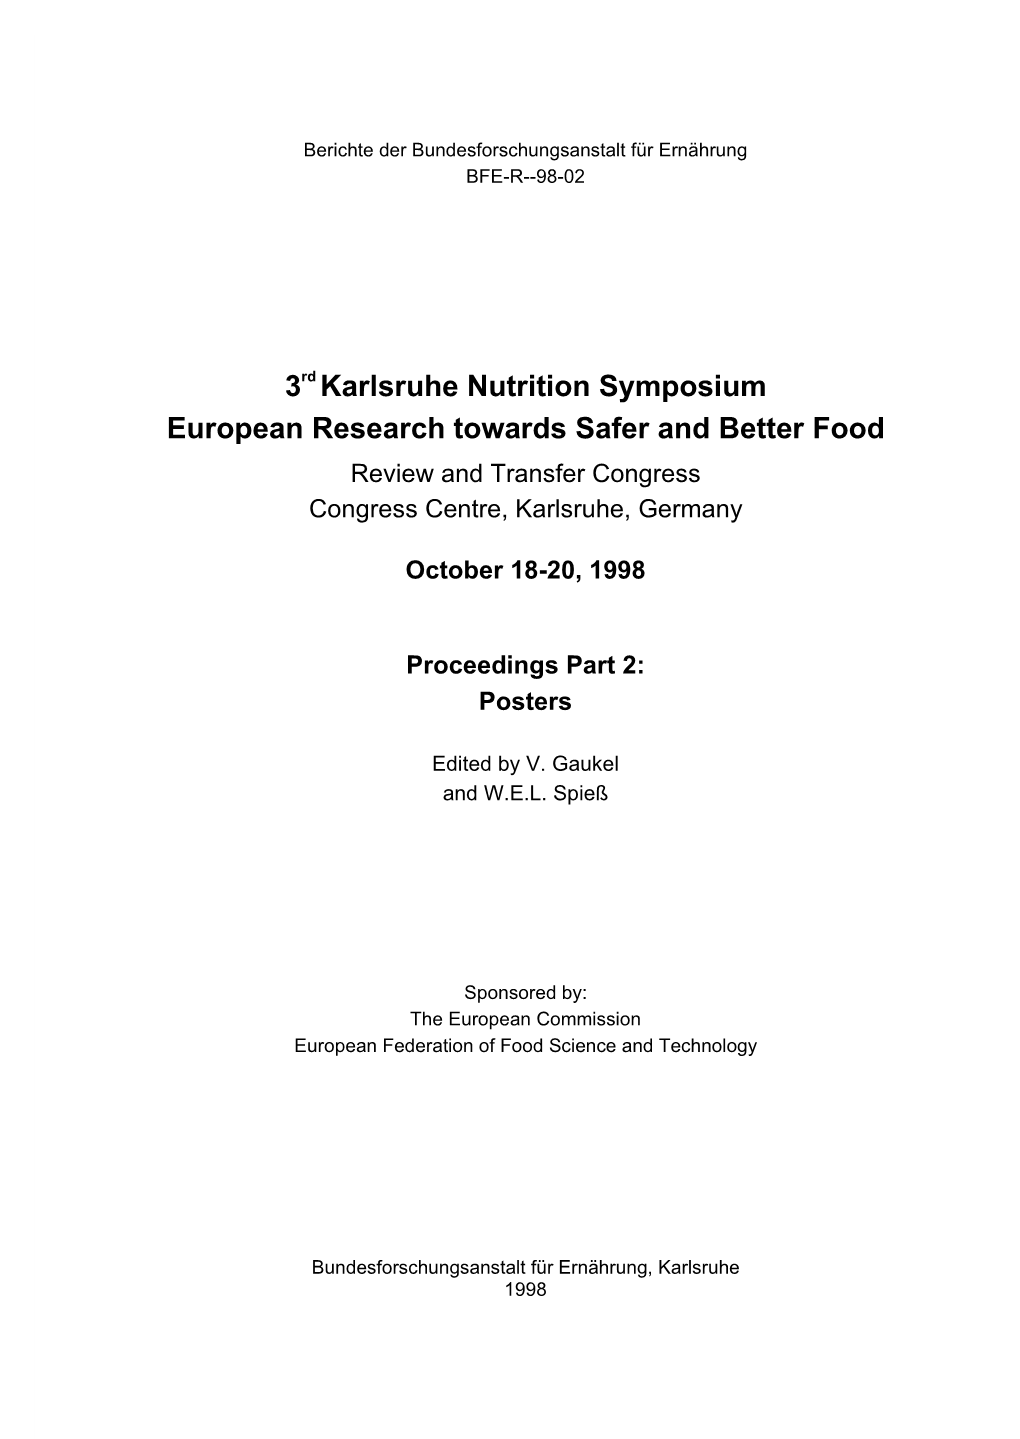 3Rd Karlsruhe Nutrition Symposium European Research Towards Safer and Better Food Review and Transfer Congress Congress Centre, Karlsruhe, Germany